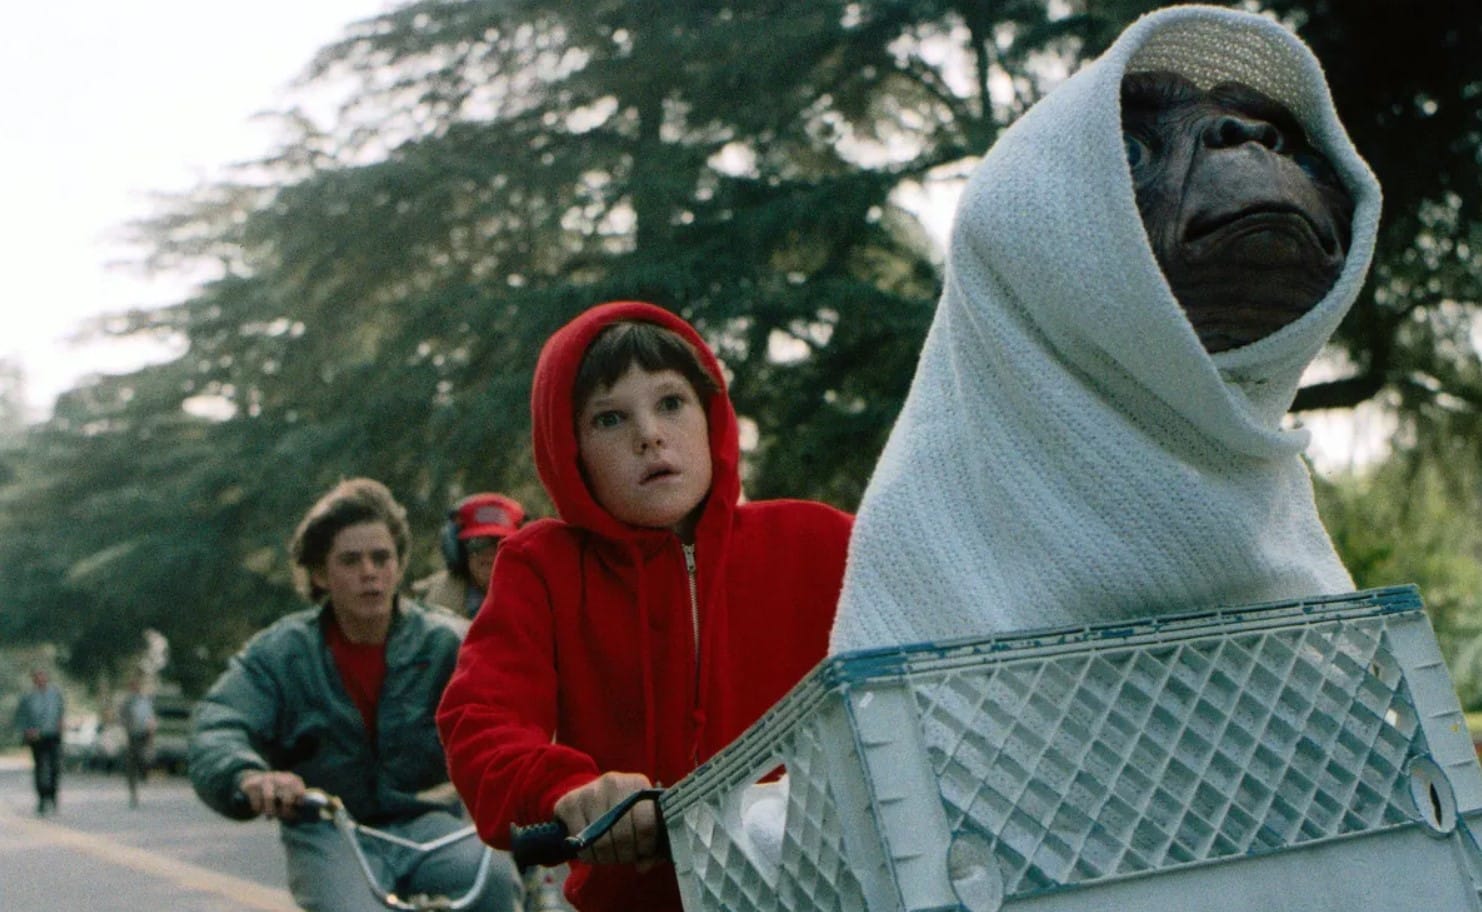 E.T.'s Terrible Unmade Sequel: E.T. 2 Nocturnal Fears - Canned Goods 